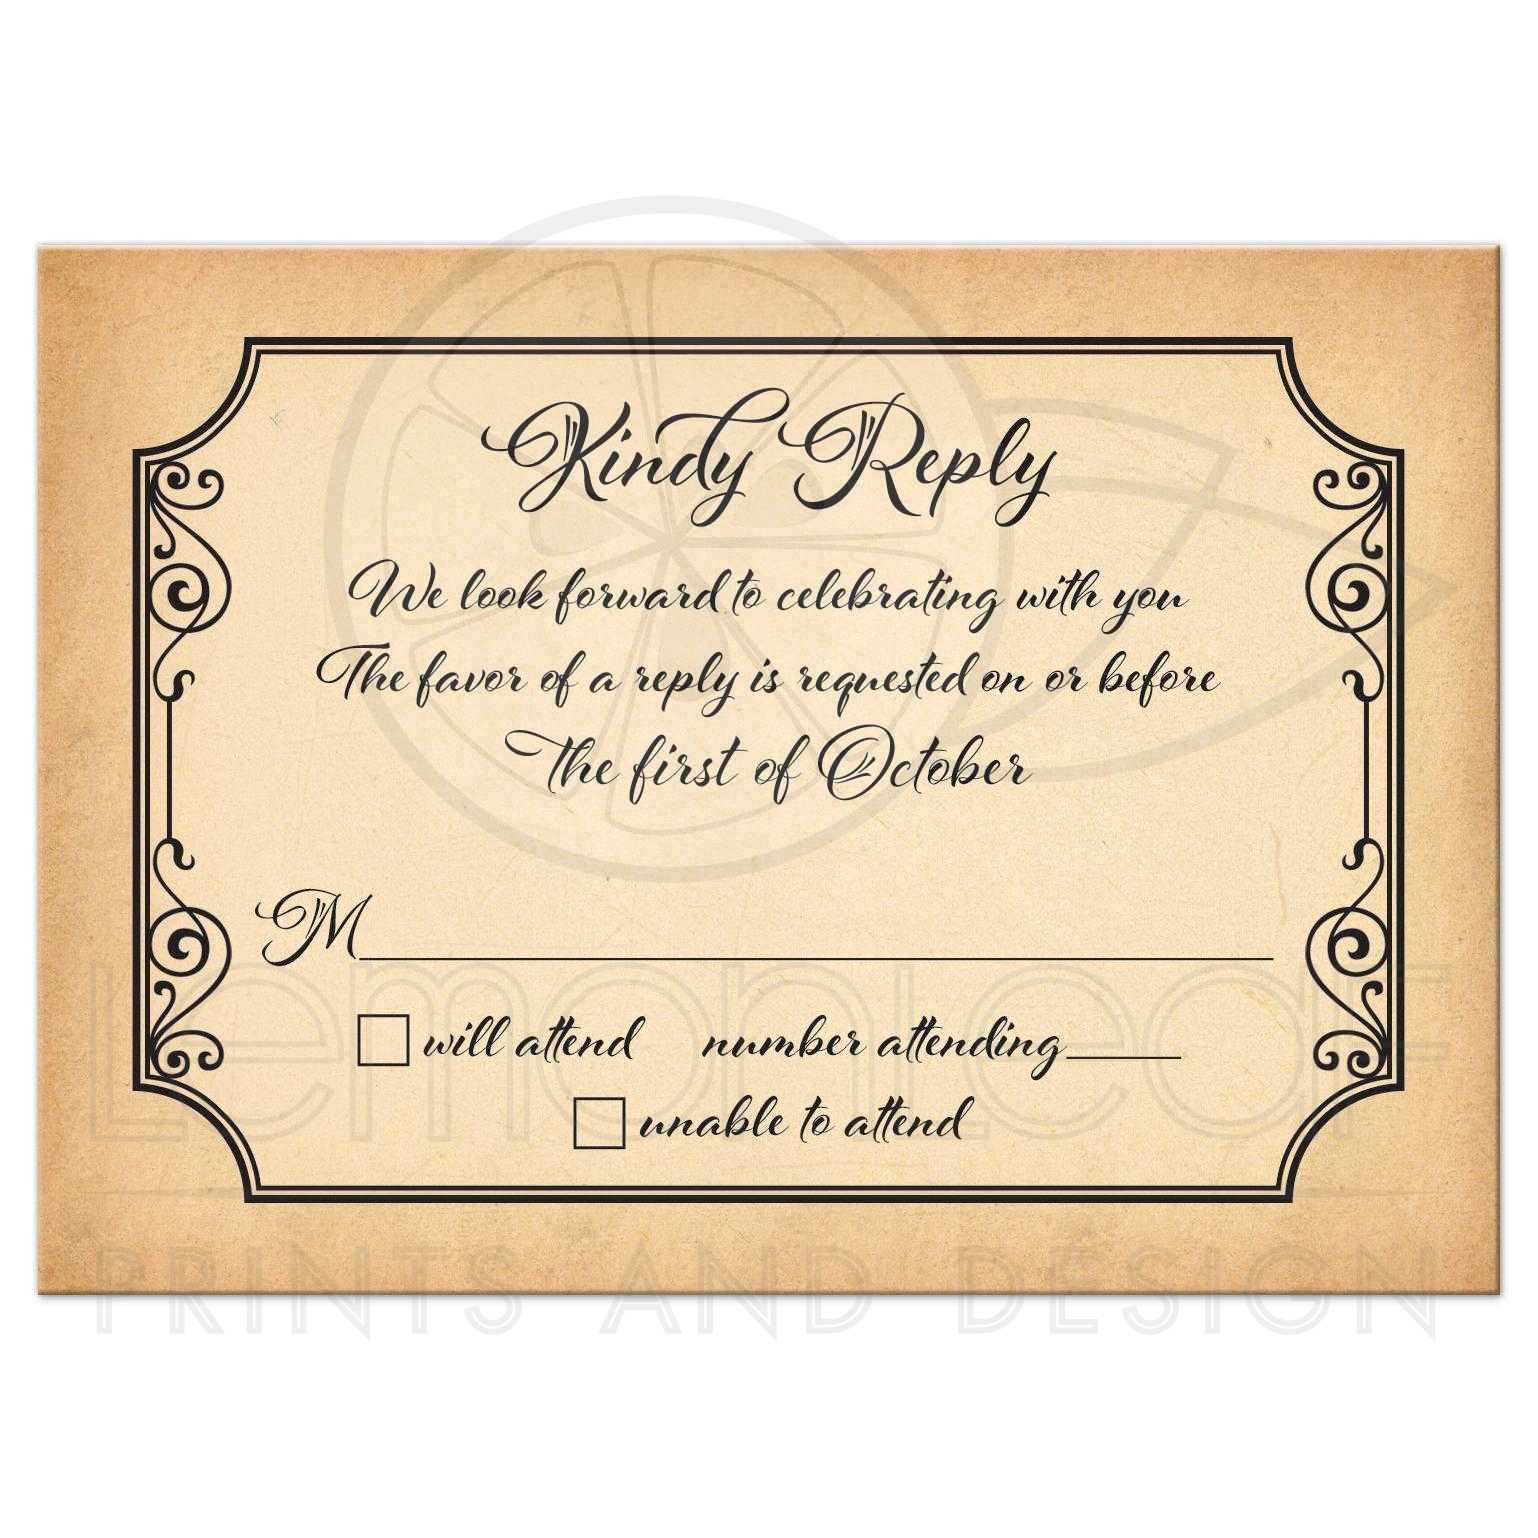 Old World Calligraphy Wedding RSVP Card Aged Parchment Look